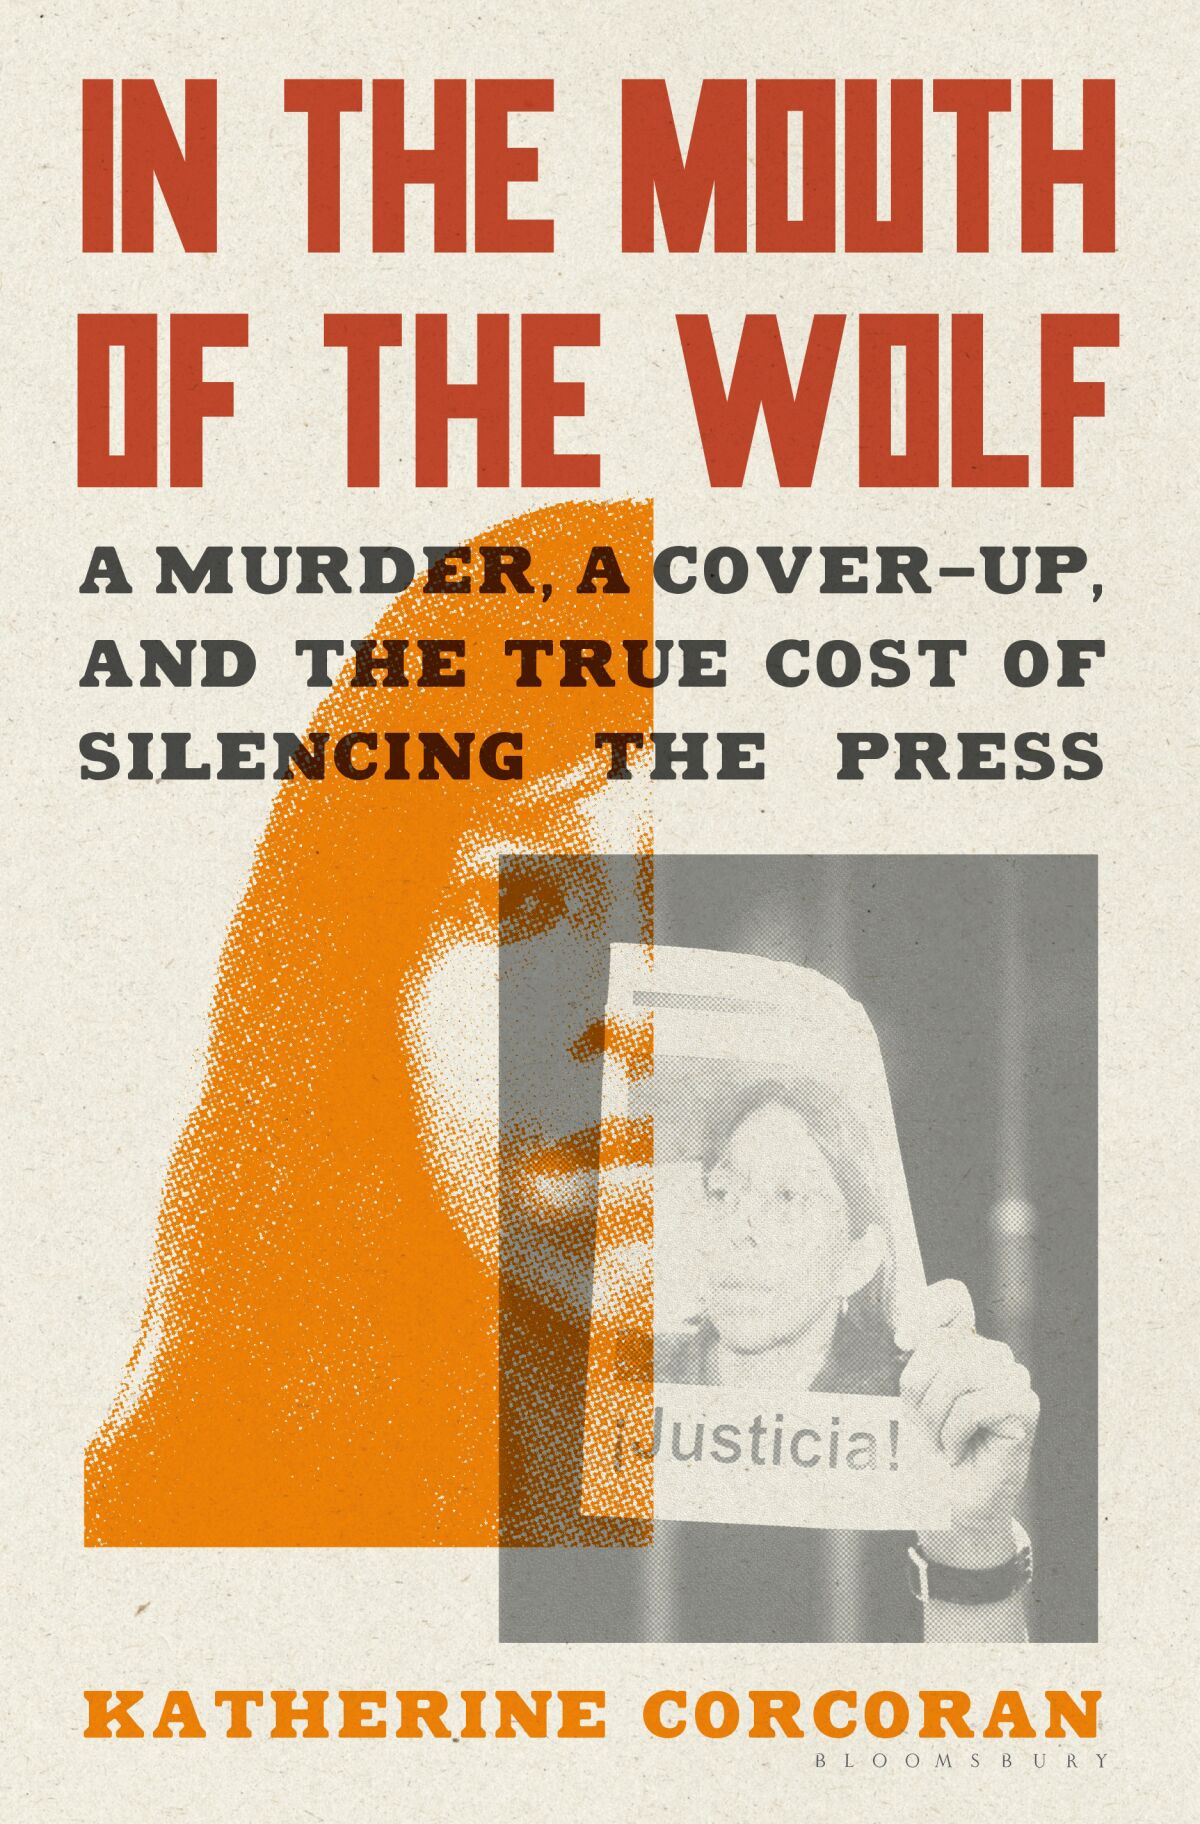 "In the Mouth of the Wolf: A Murder, a Cover-Up, and the True Cost of Silencing the Press," by Katherine Corcoran.